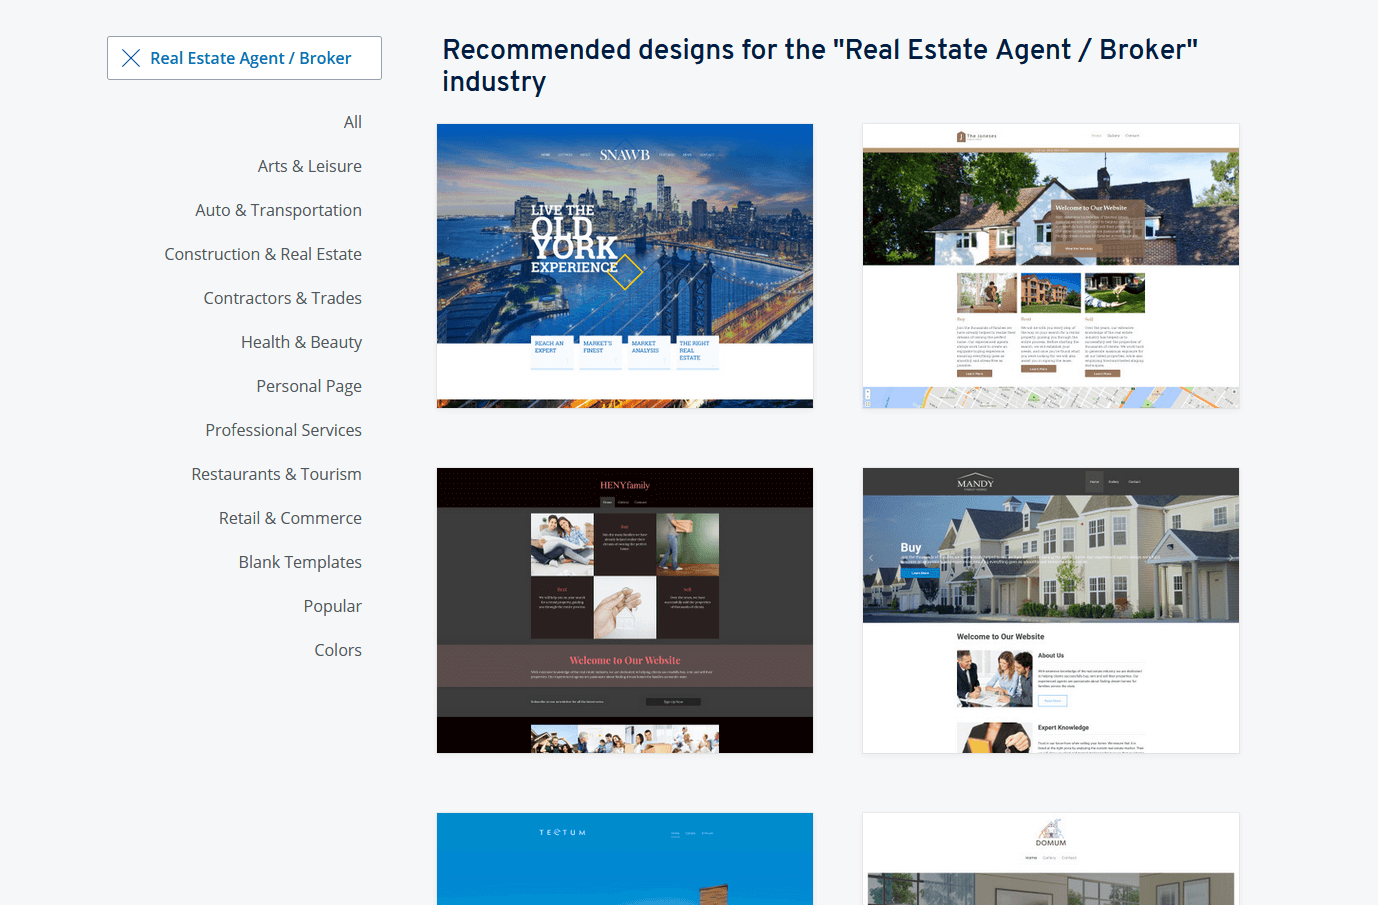 IONOS design templates: Selection of suggestions for the real estate industry